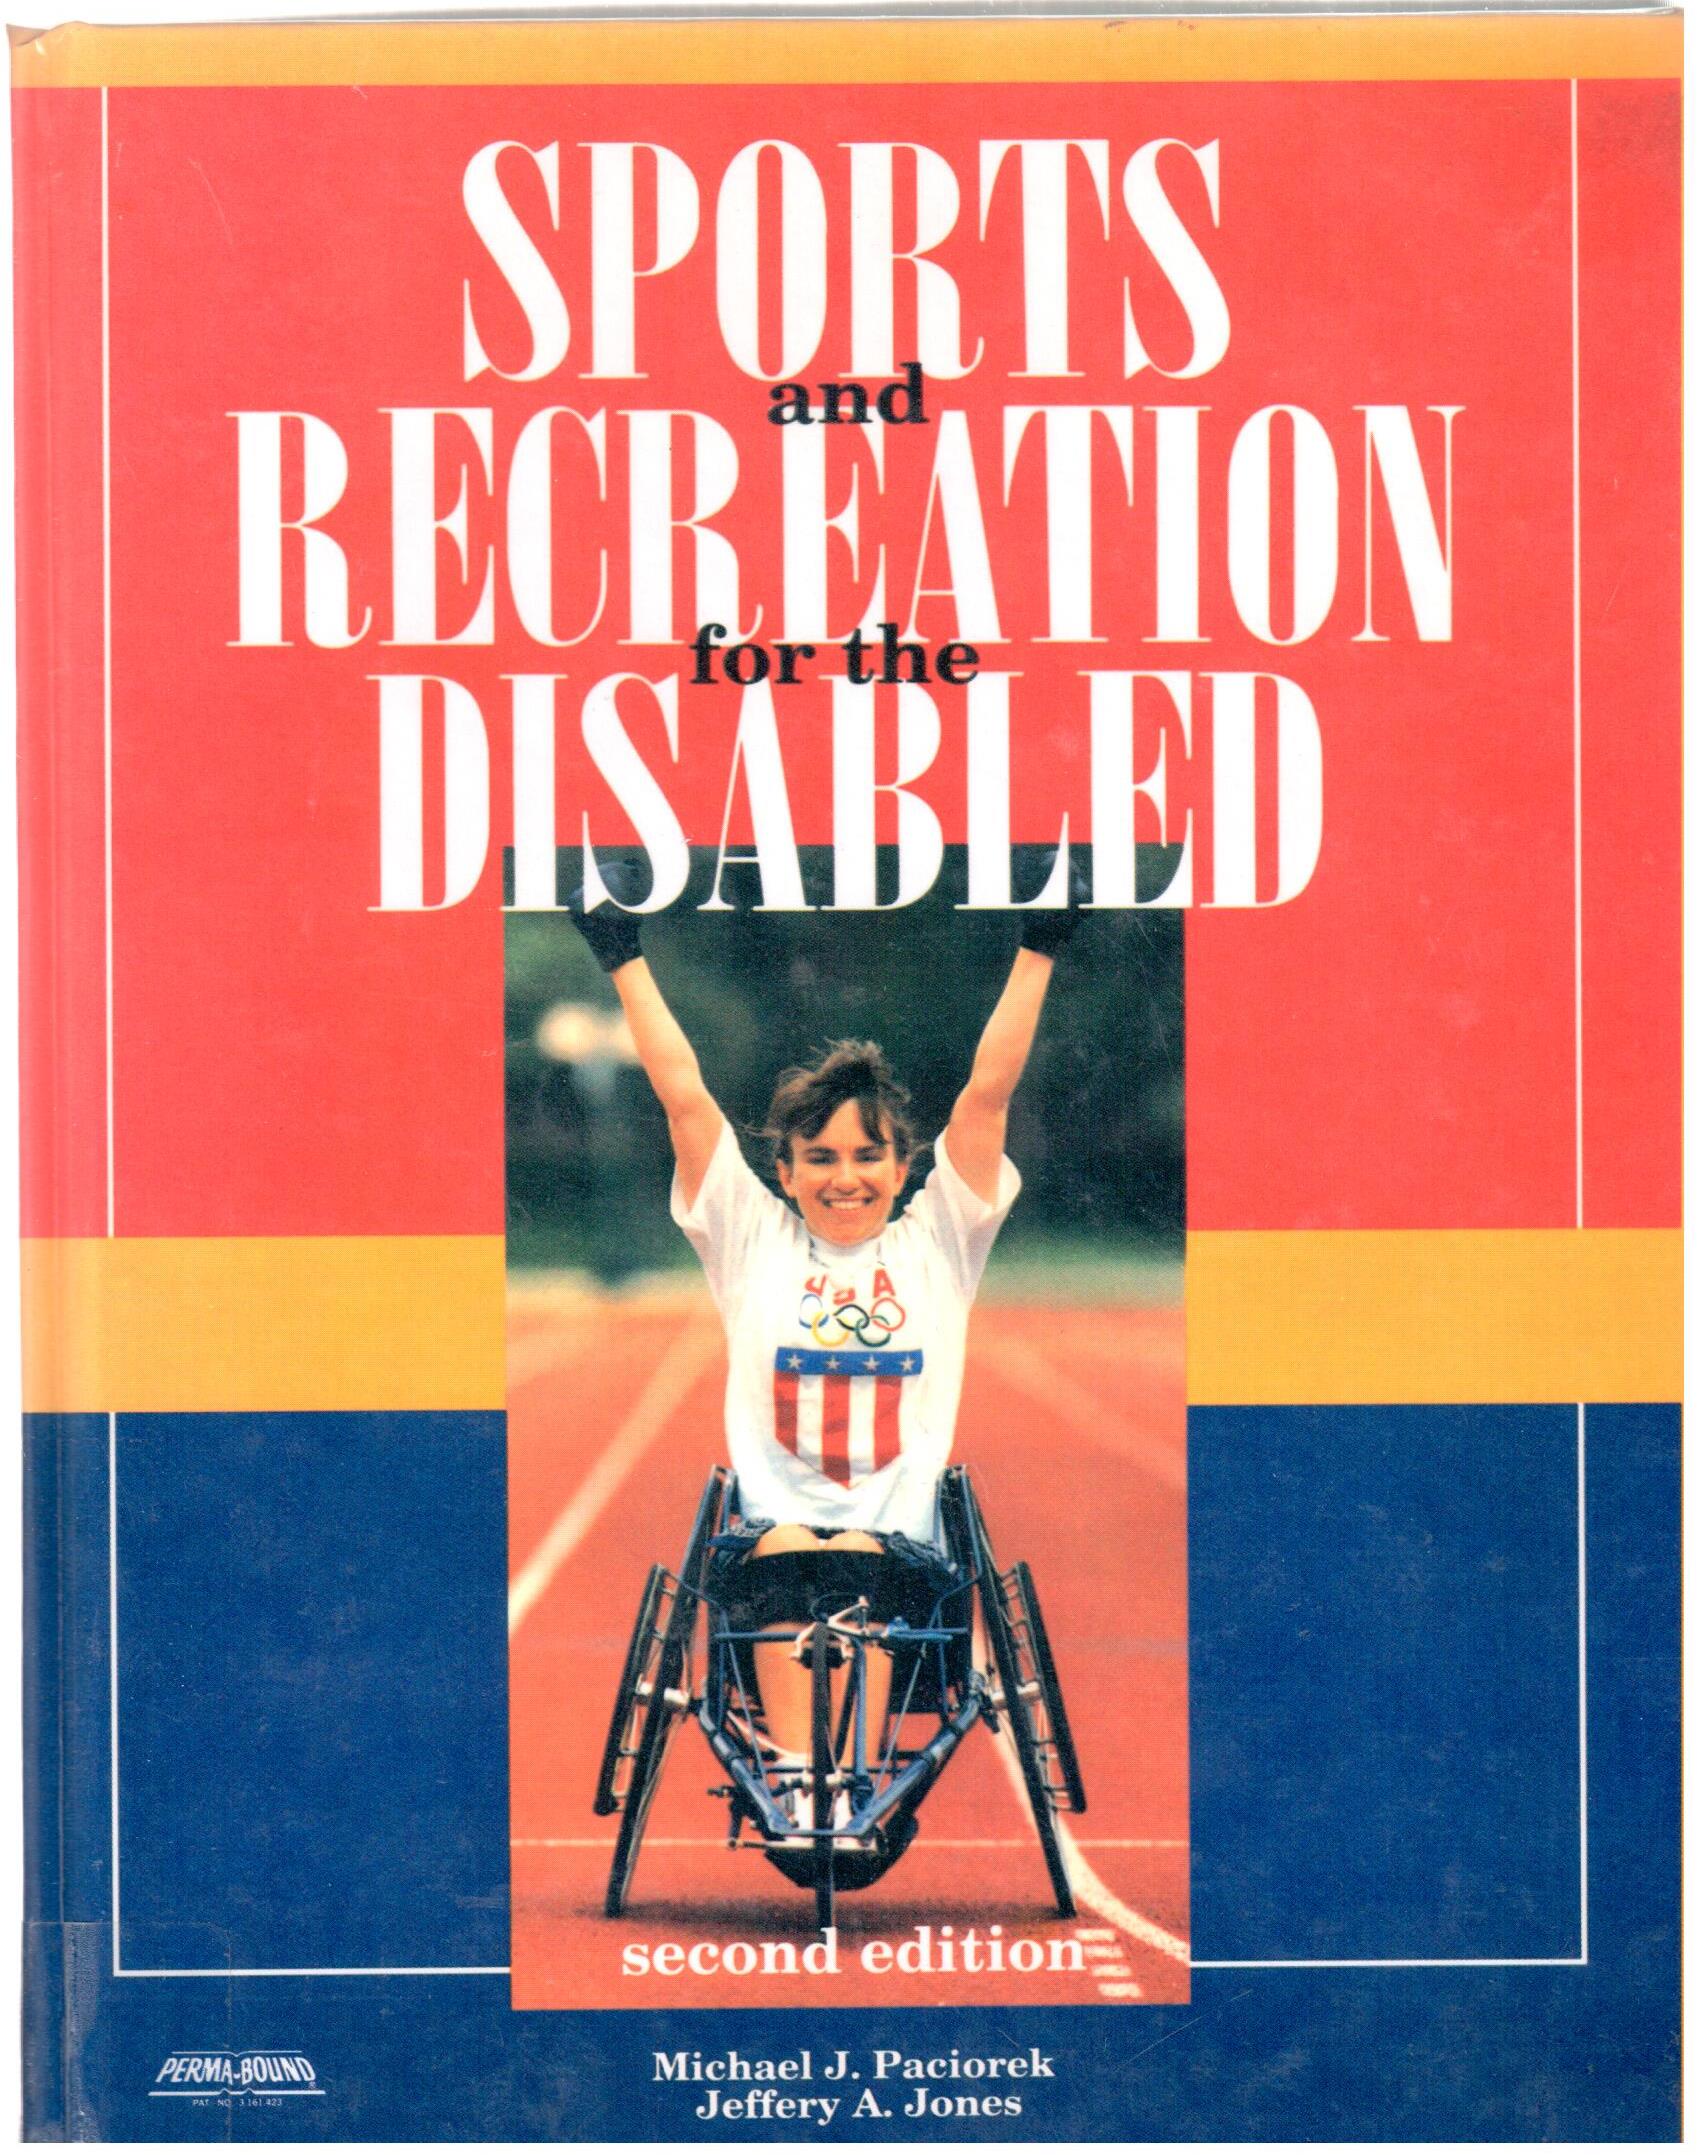 Sports and recreation for the disables